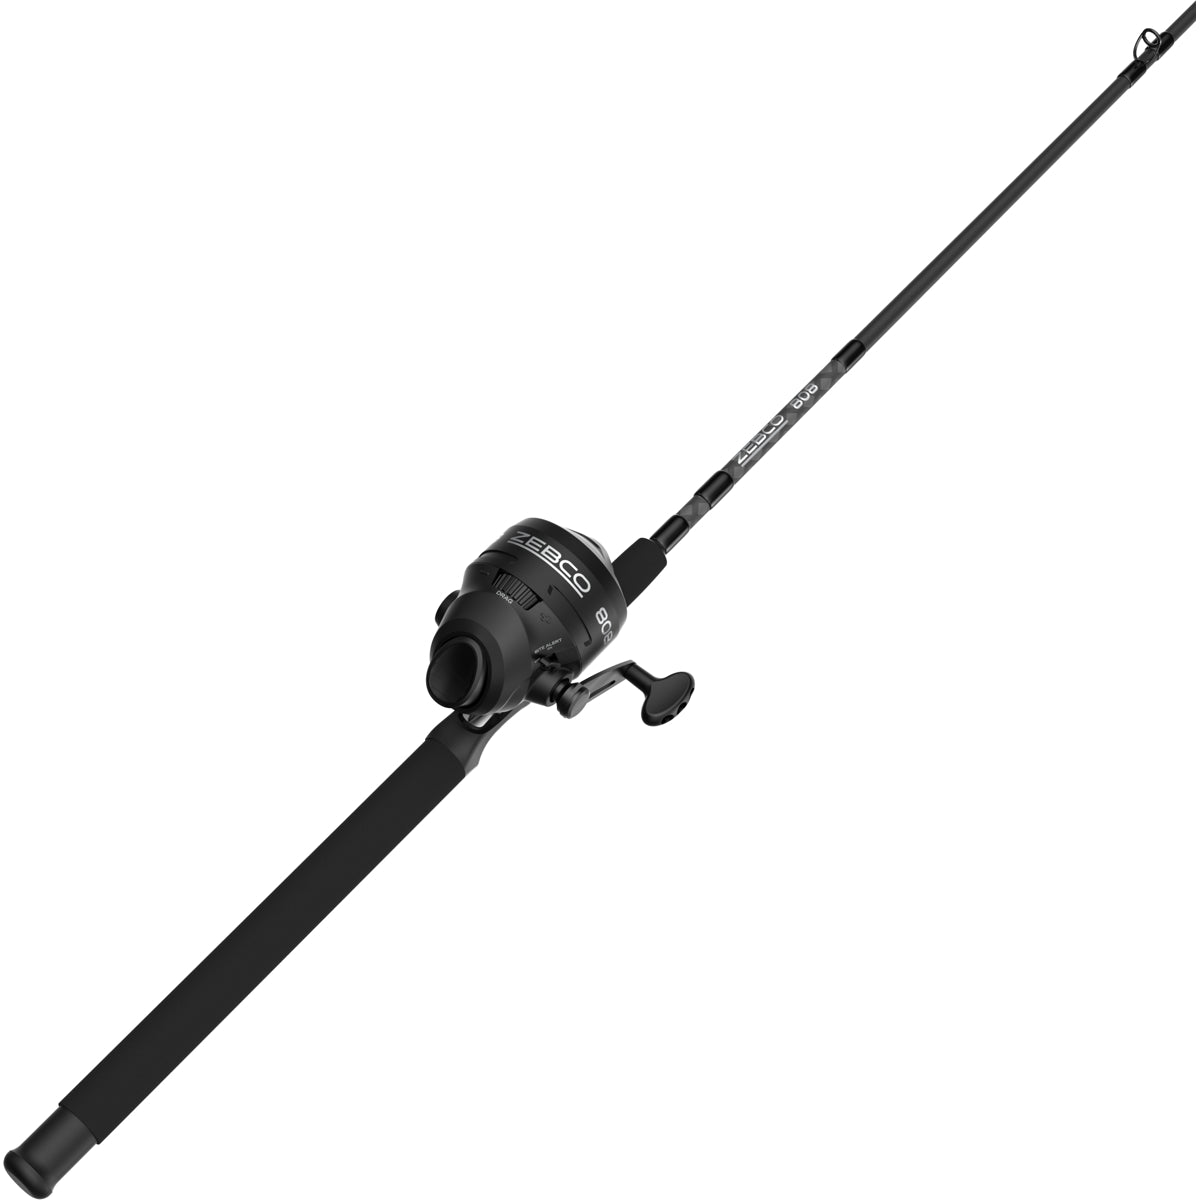 Photo of Zebco 808 Spincast Combo - Bulk for sale at United Tackle Shops.